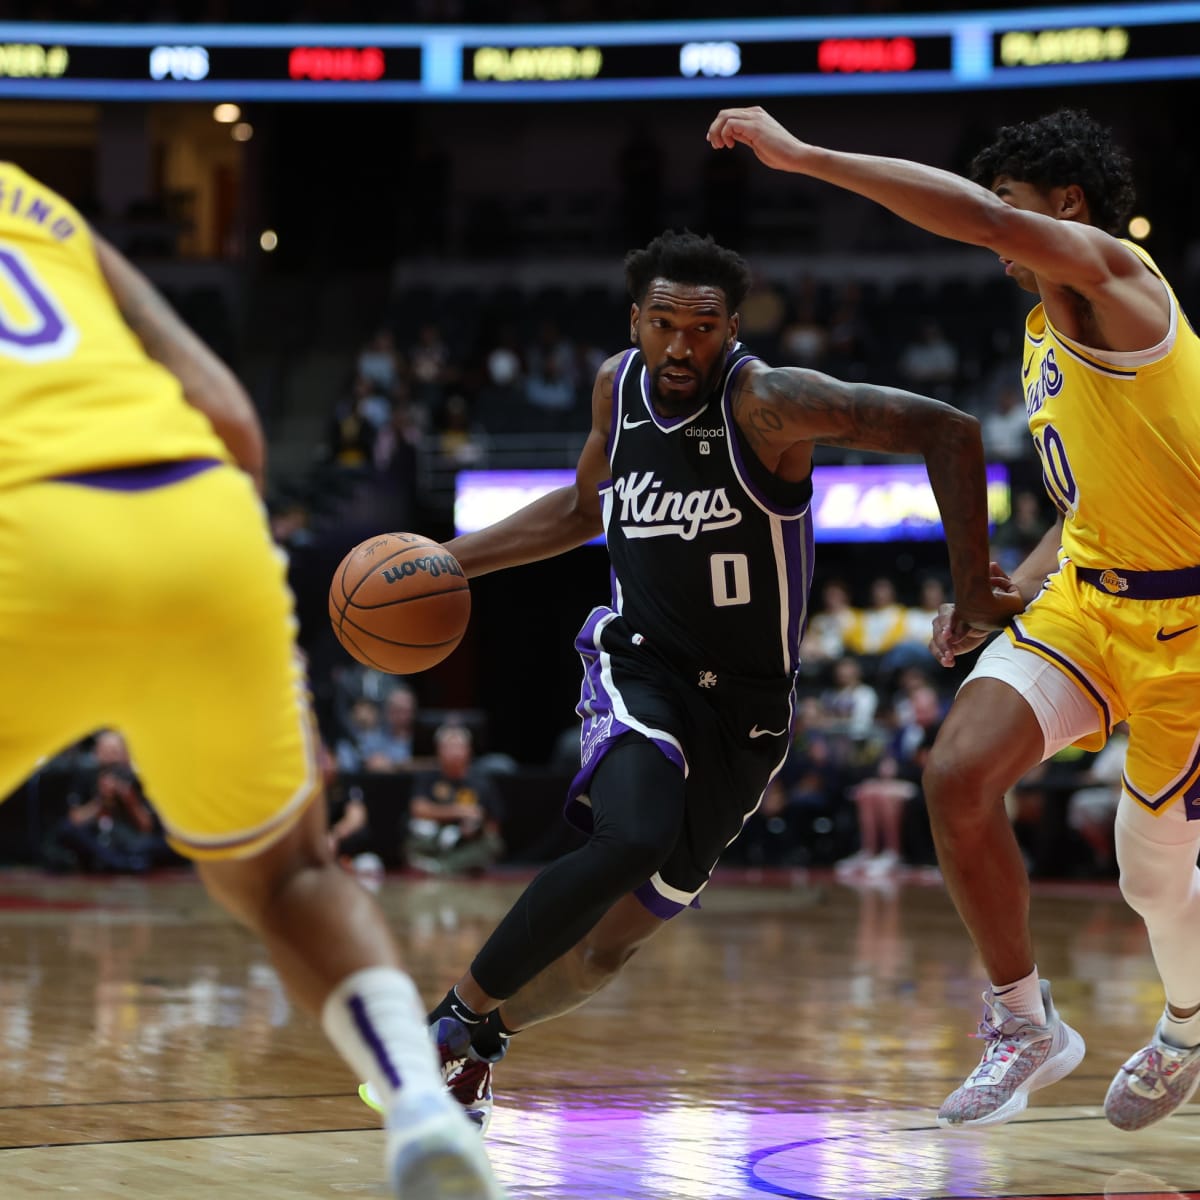 Will Any of the L.A. Lakers' Young Players Emerge as a Star